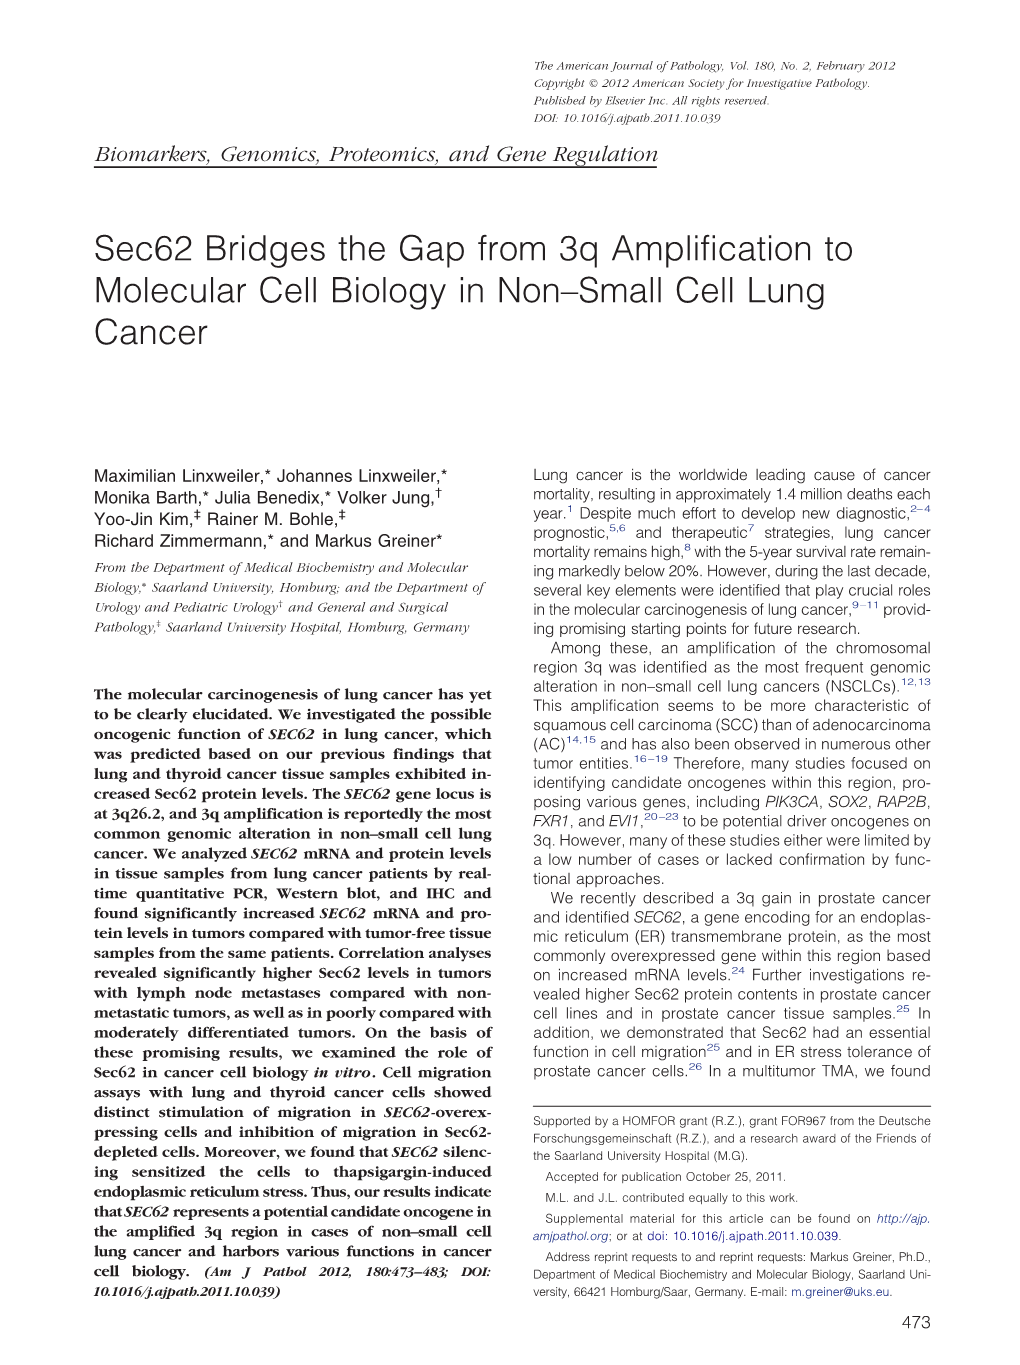 Sec62 Bridges the Gap from 3Q Amplification to Molecular Cell Biology in Non–Small Cell Lung Cancer